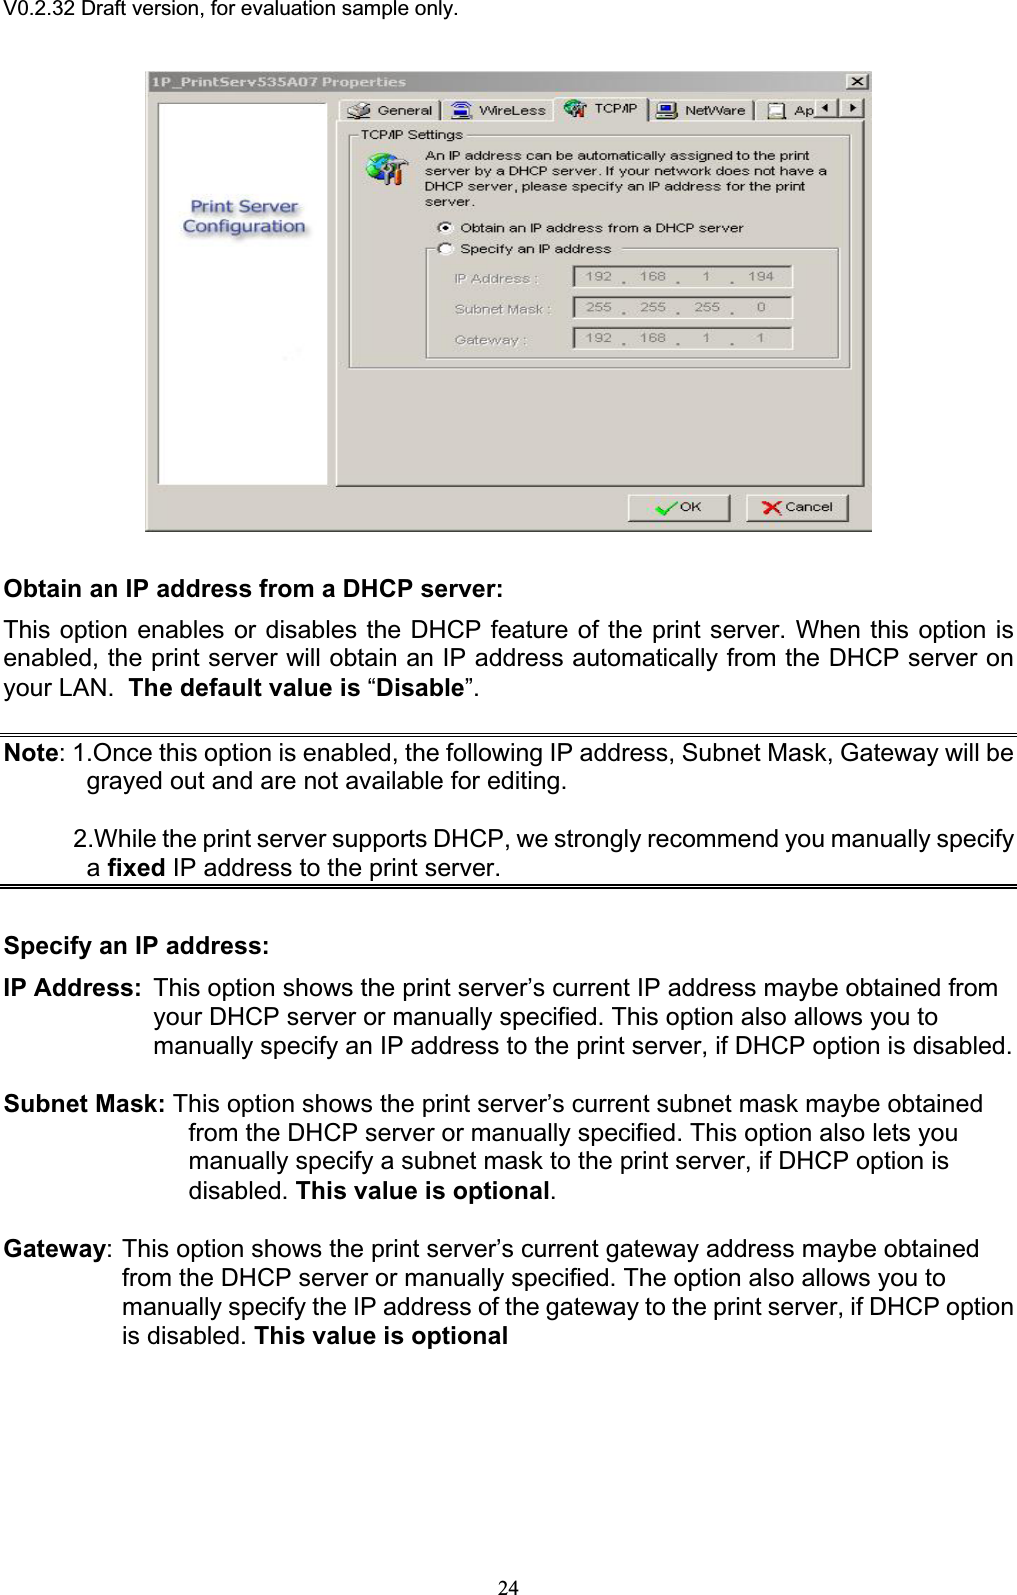 V0.2.32 Draft version, for evaluation sample only.Obtain an IP address from a DHCP server: This option enables or disables the DHCP feature of the print server. When this option is enabled, the print server will obtain an IP address automatically from the DHCP server on your LAN. The default value is “Disable”.Note: 1.Once this option is enabled, the following IP address, Subnet Mask, Gateway will be grayed out and are not available for editing.           2.While the print server supports DHCP, we strongly recommend you manually specify afixed IP address to the print server.Specify an IP address:IP Address: This option shows the print server’s current IP address maybe obtained from your DHCP server or manually specified. This option also allows you to manually specify an IP address to the print server, if DHCP option is disabled. Subnet Mask: This option shows the print server’s current subnet mask maybe obtained from the DHCP server or manually specified. This option also lets you manually specify a subnet mask to the print server, if DHCP option is disabled. This value is optional.Gateway: This option shows the print server’s current gateway address maybe obtained from the DHCP server or manually specified. The option also allows you to manually specify the IP address of the gateway to the print server, if DHCP option is disabled. This value is optional 24